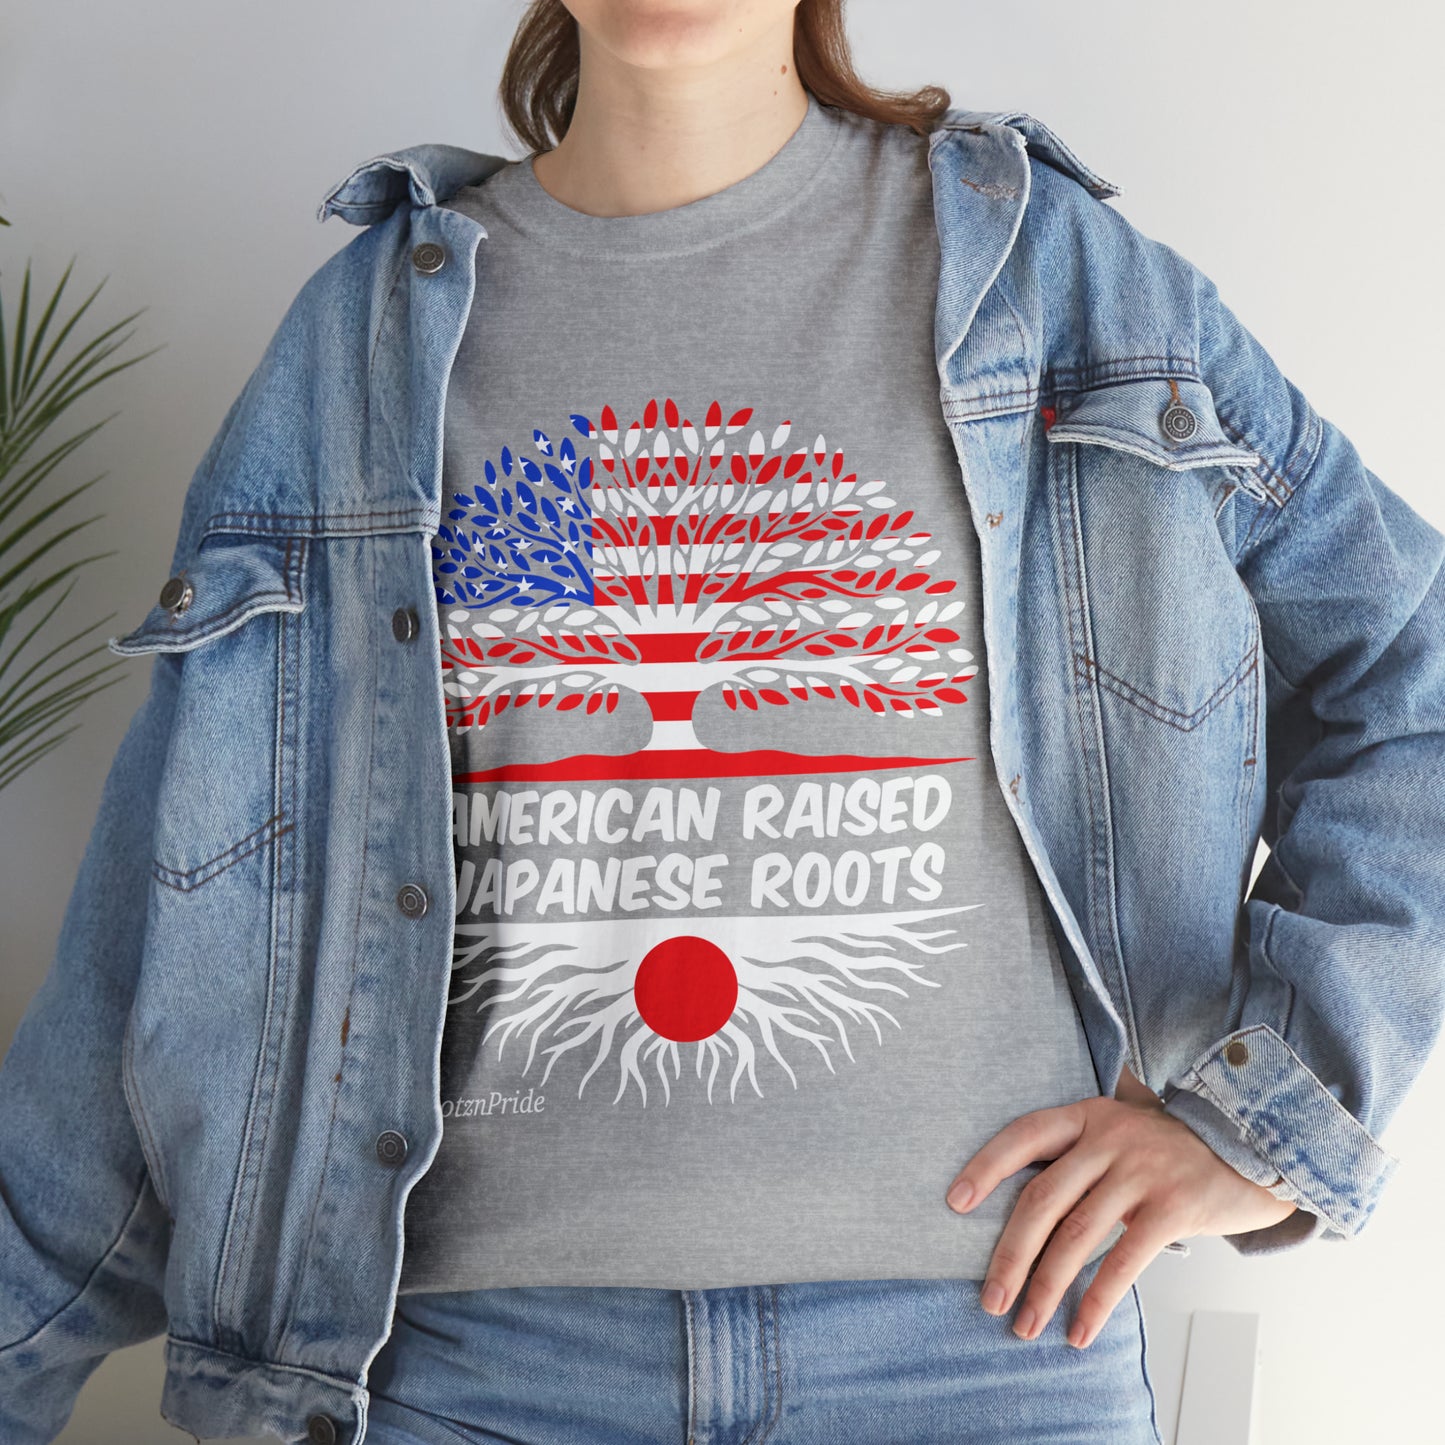 Japanese Roots Design 1: Adult T-Shirt